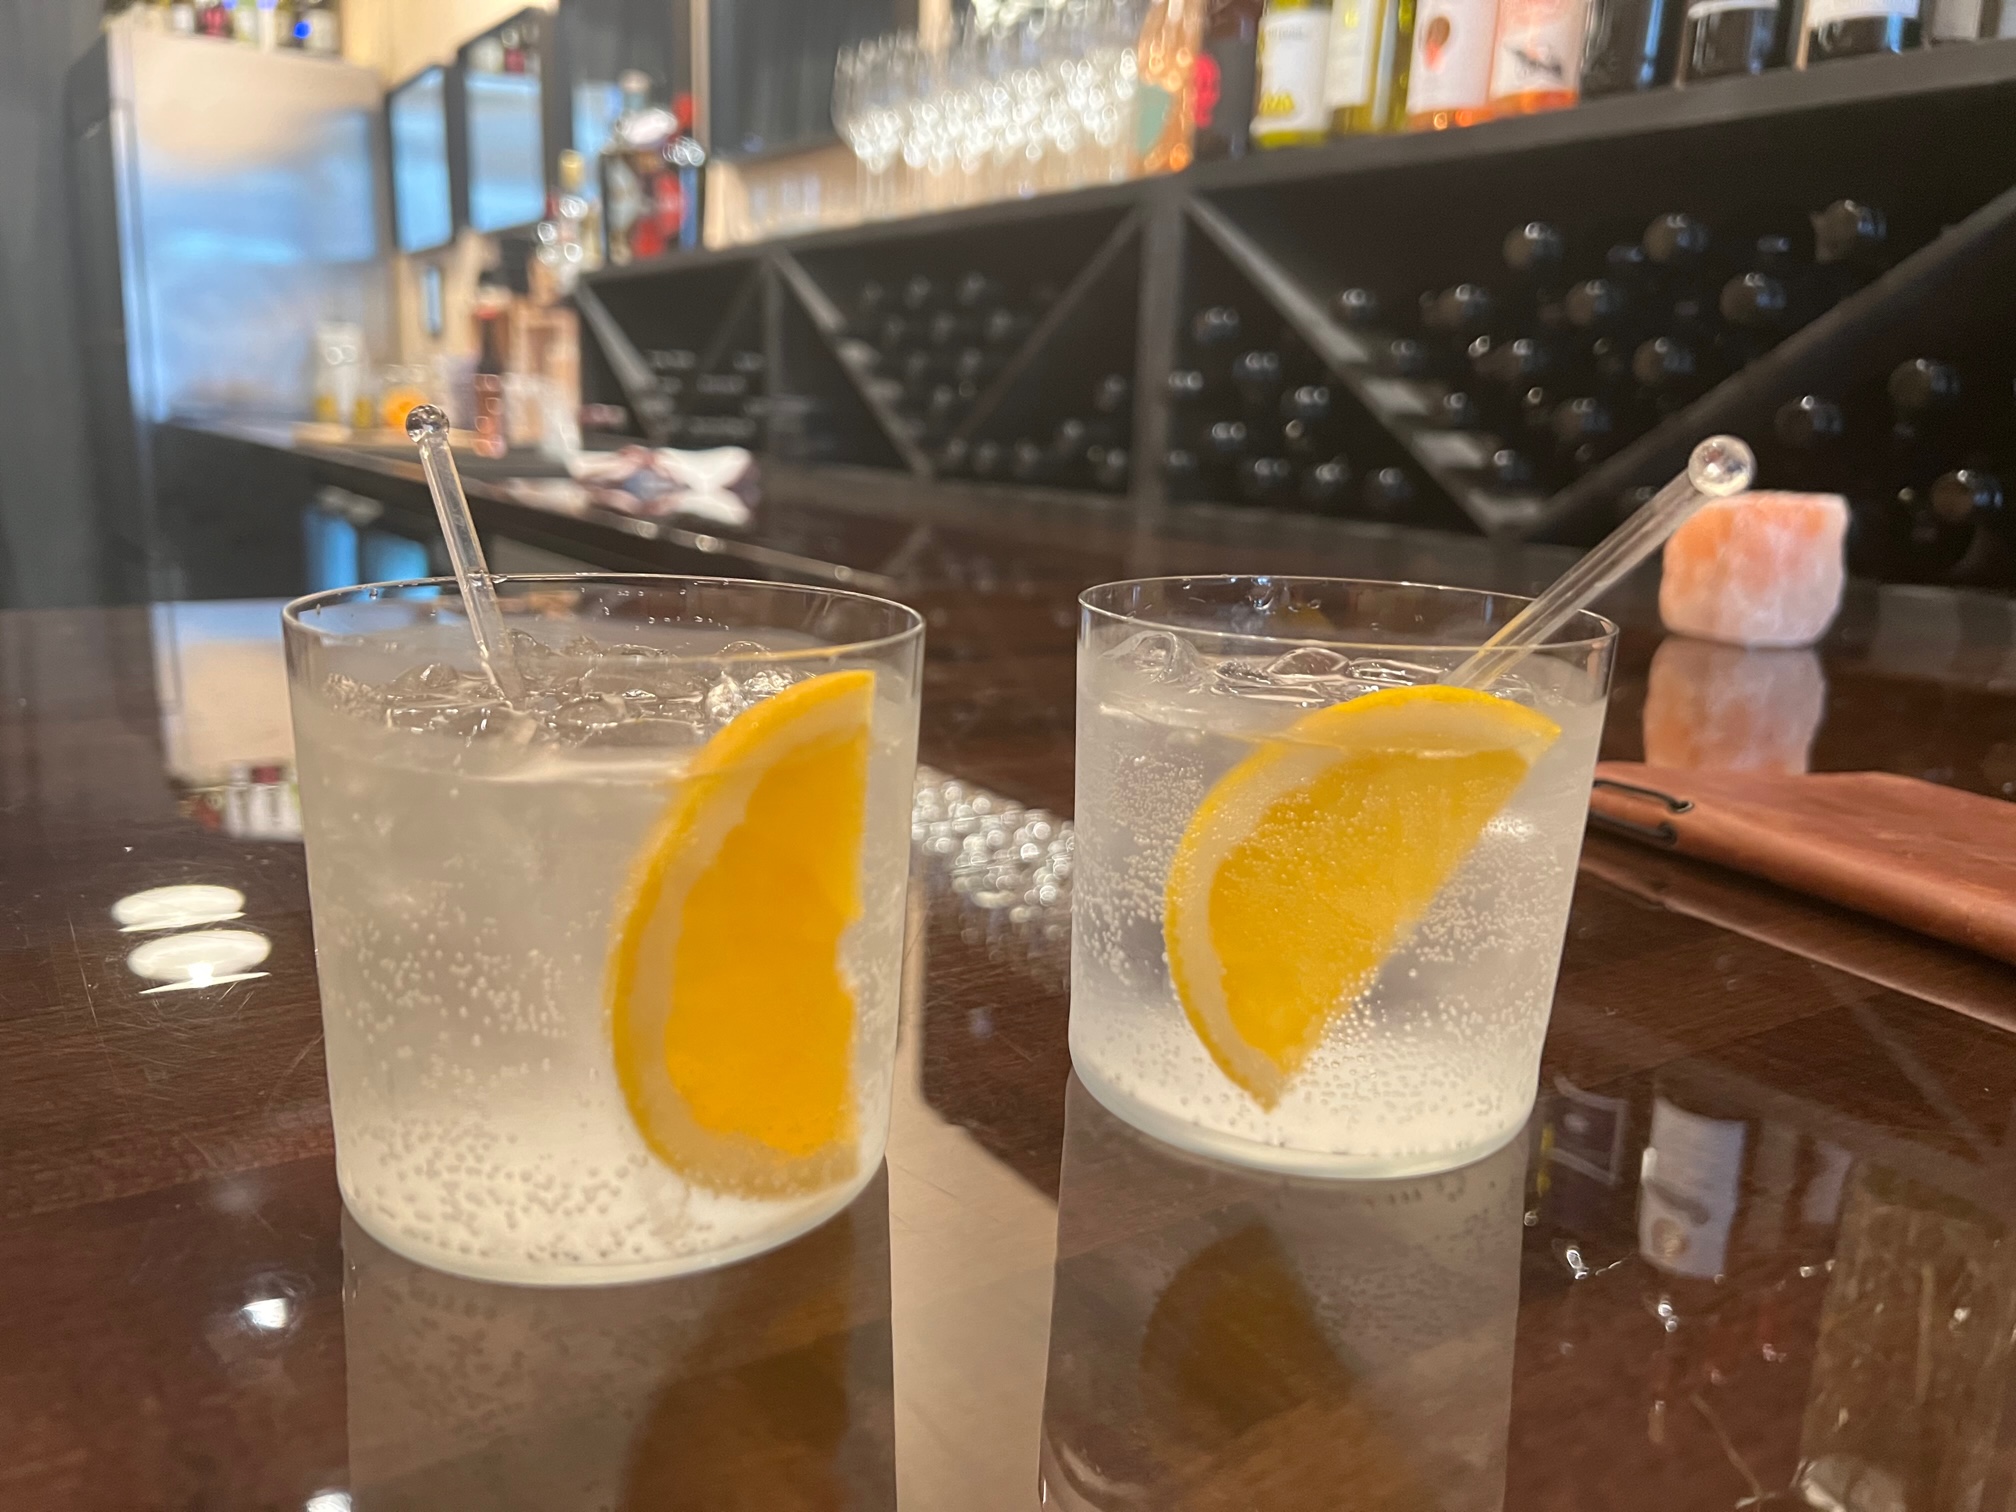 On a dark wooden bar at Ladro Enoteca, there are two gin and tonics in a clear half tumbler with a slice of orange and a clear stir stick. Photo by Alyssa Buckley.